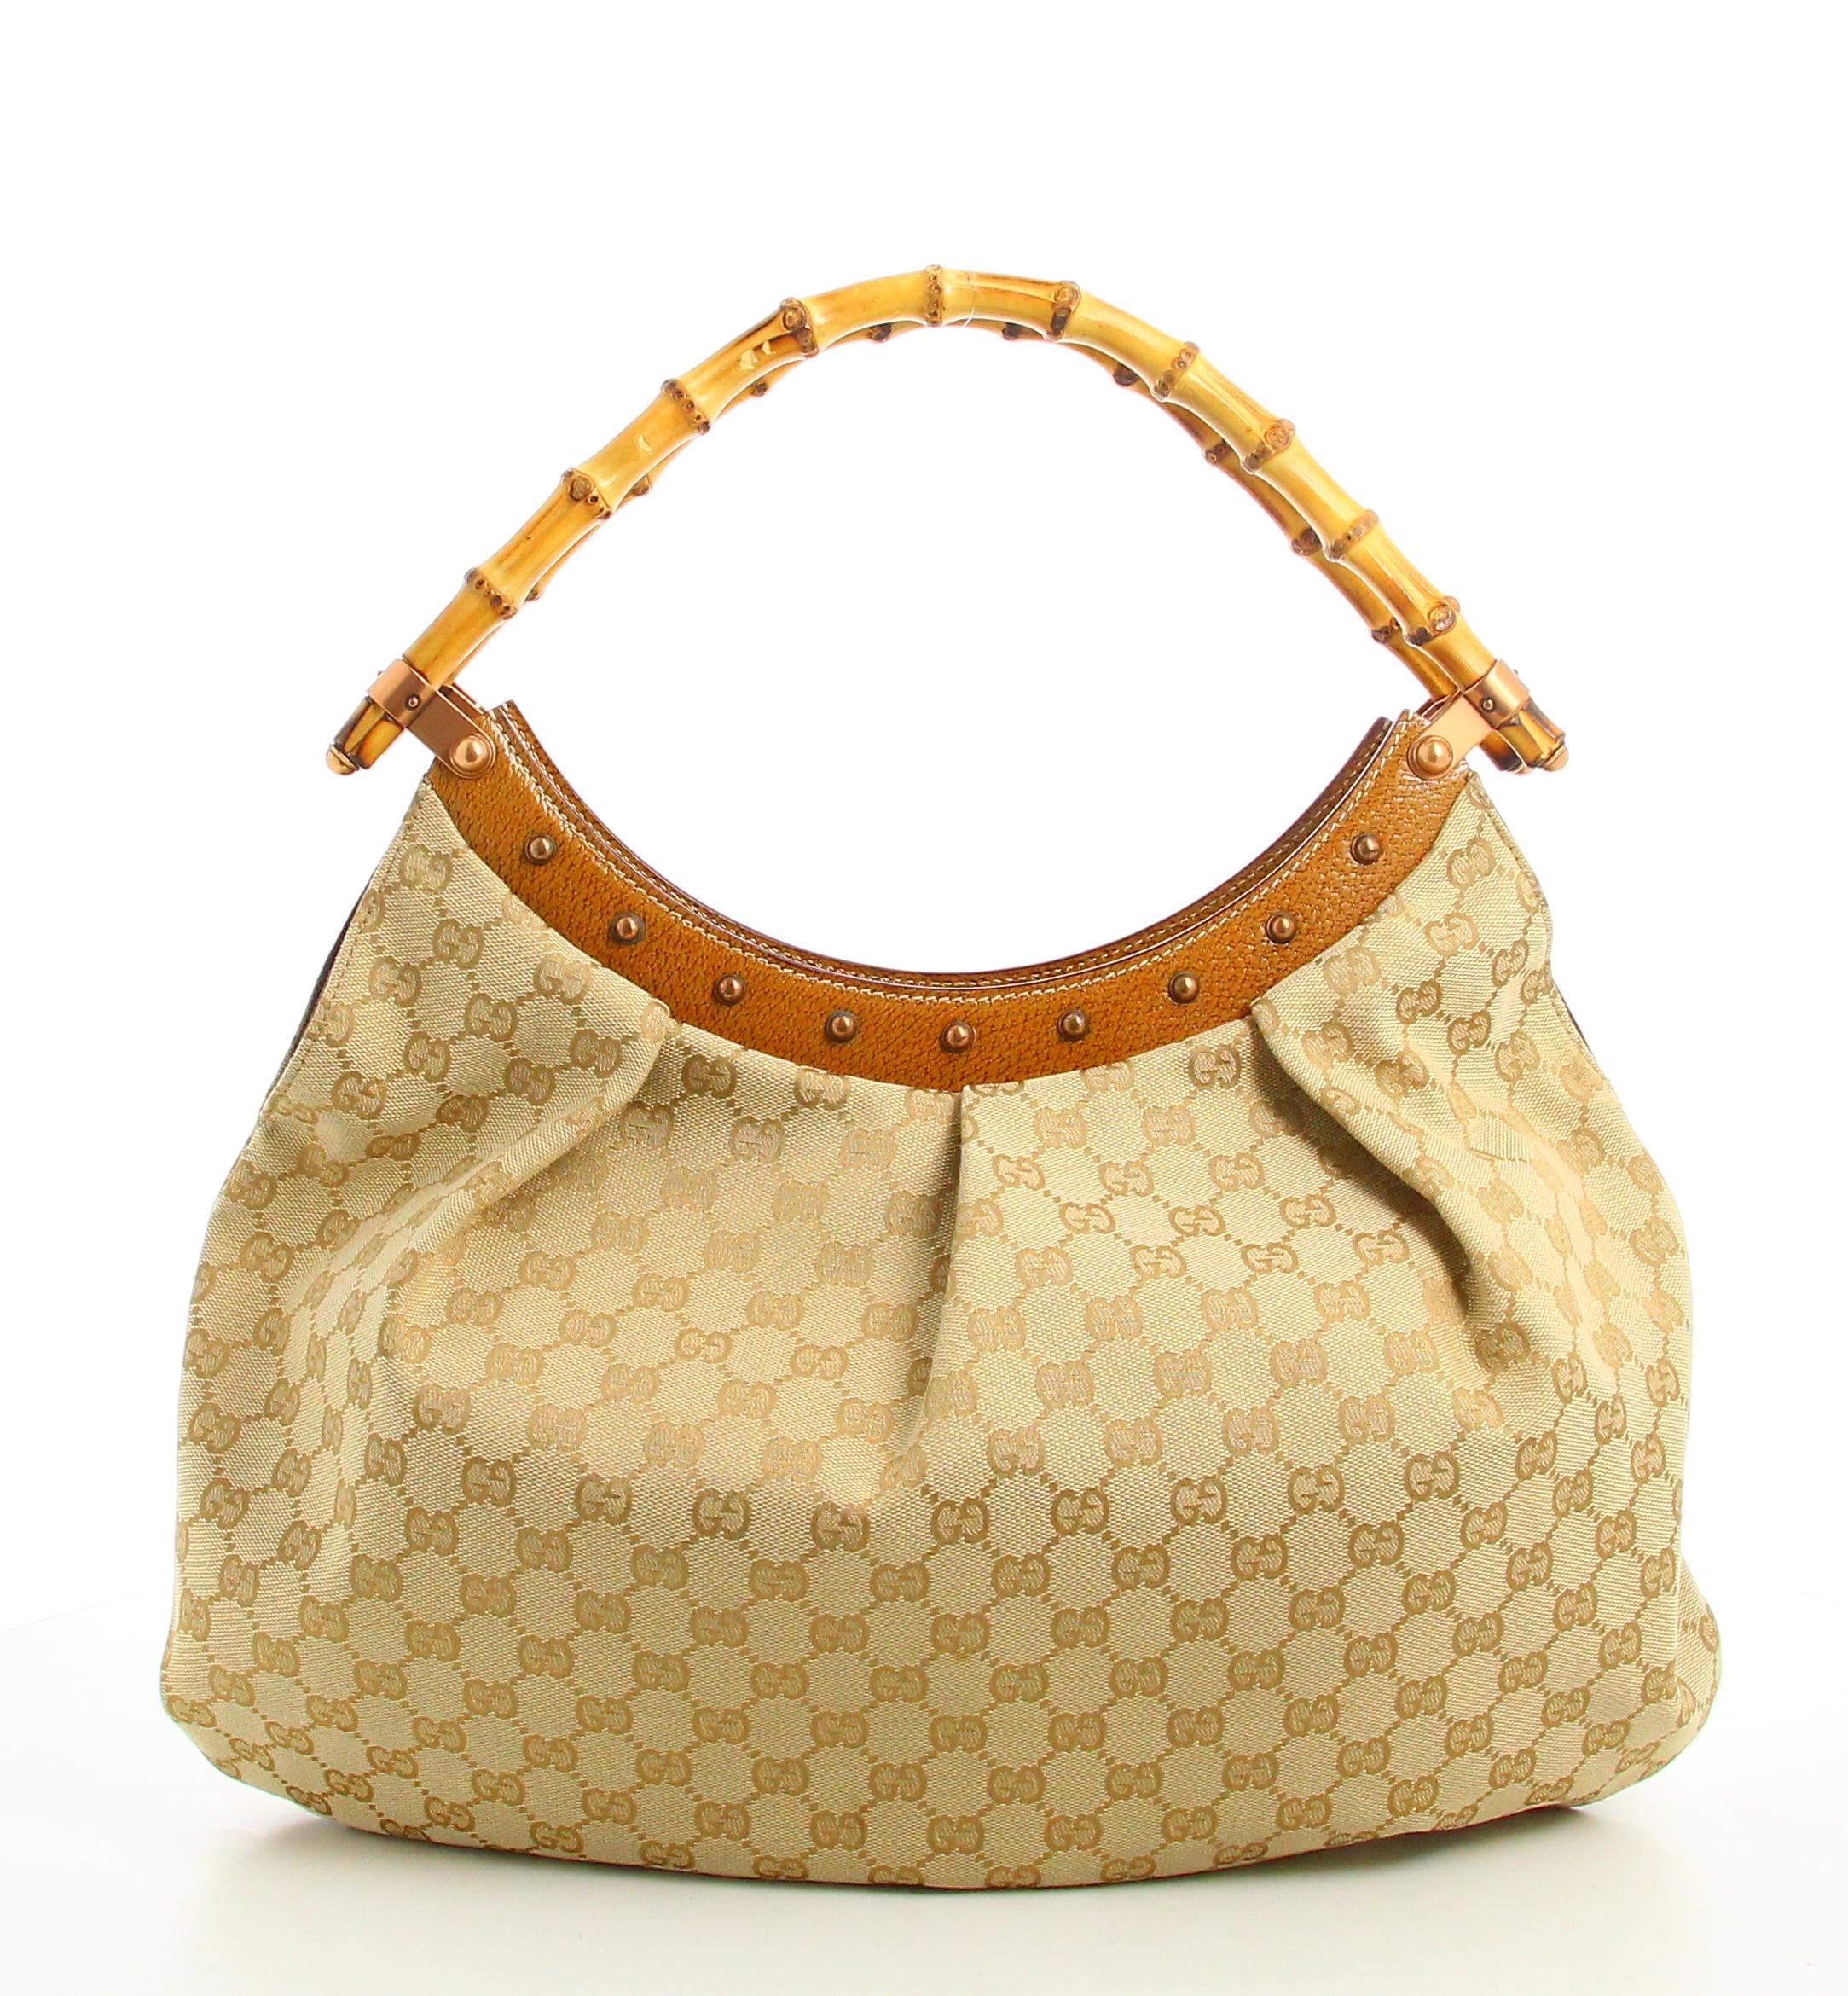 Gucci Monogram Beige Handbag 

- Very good condition. Shows very slight signs of wear over time.
- Gucci Handbag 
- Bamboo handle
- Beige monogram fabric 
- Inside: brown lining plus inside pocket